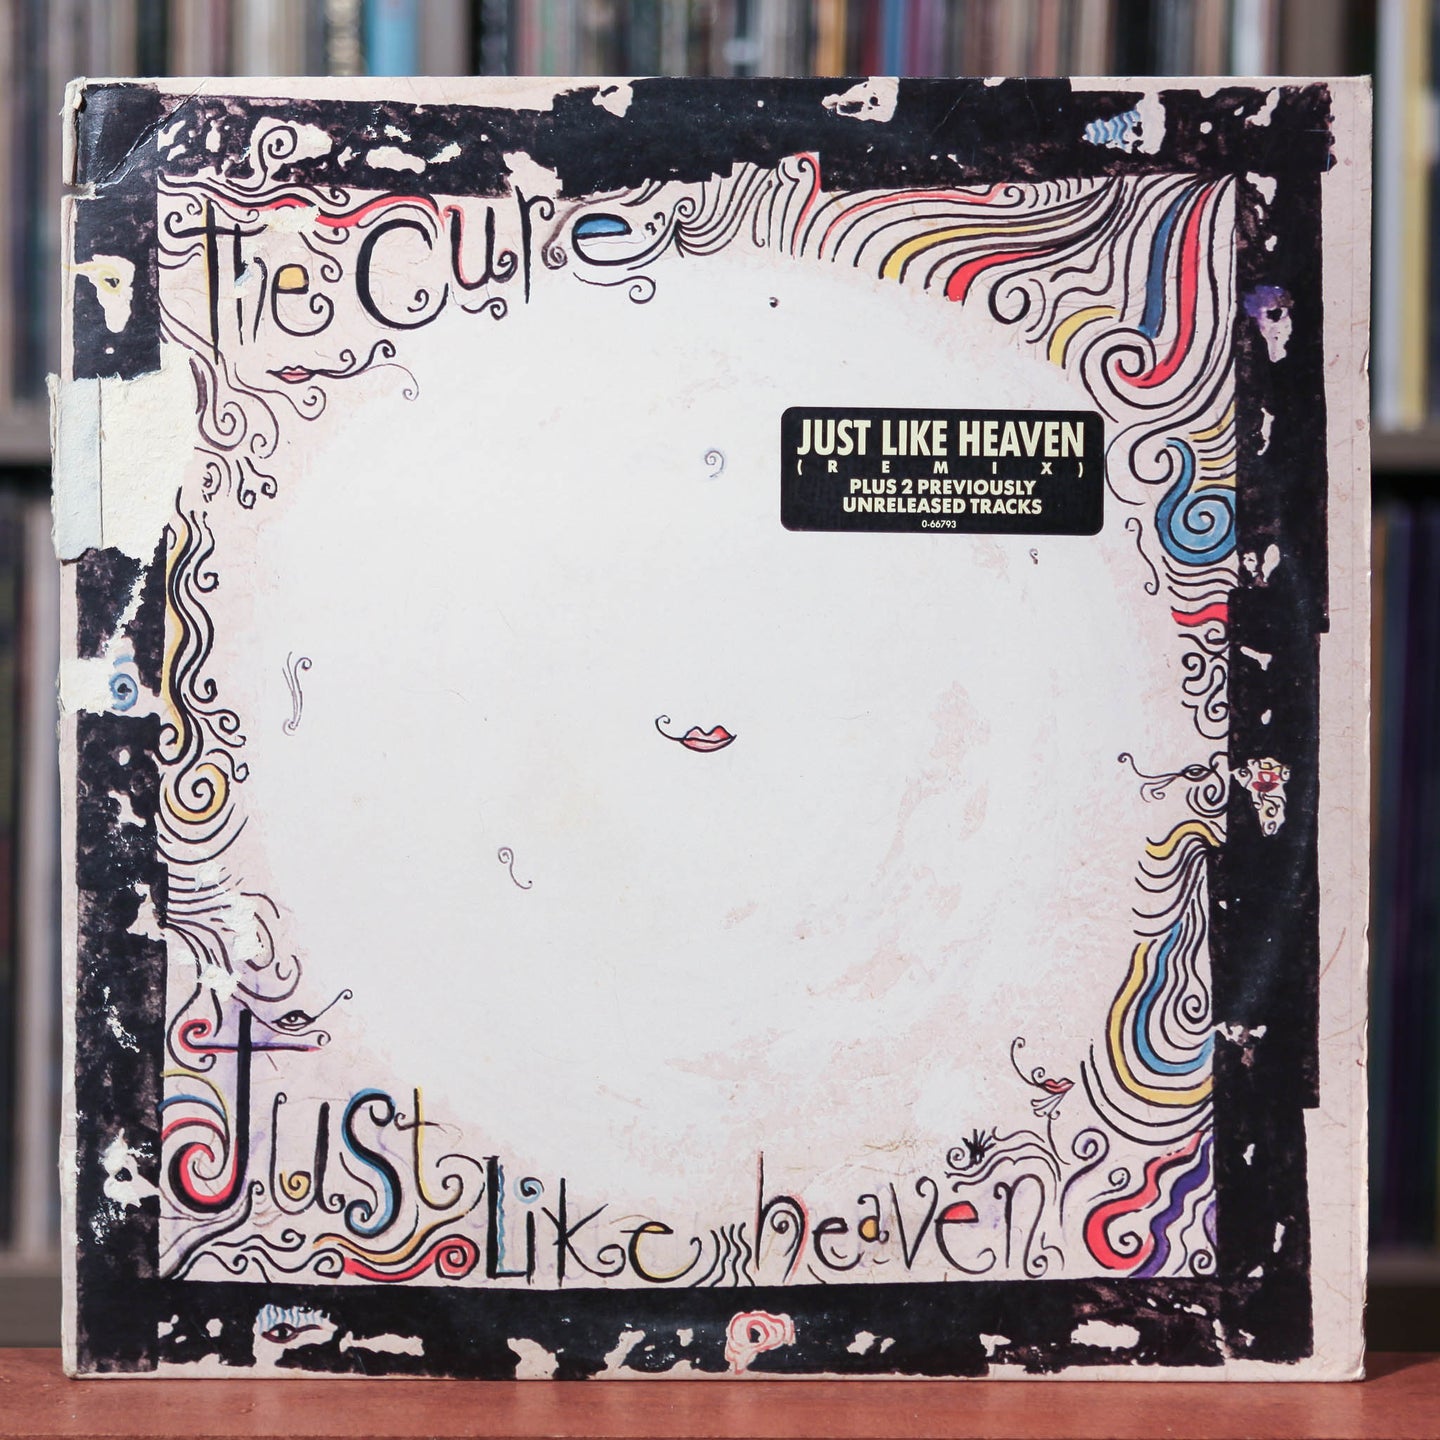 The Cure - Just Like Heaven - 12